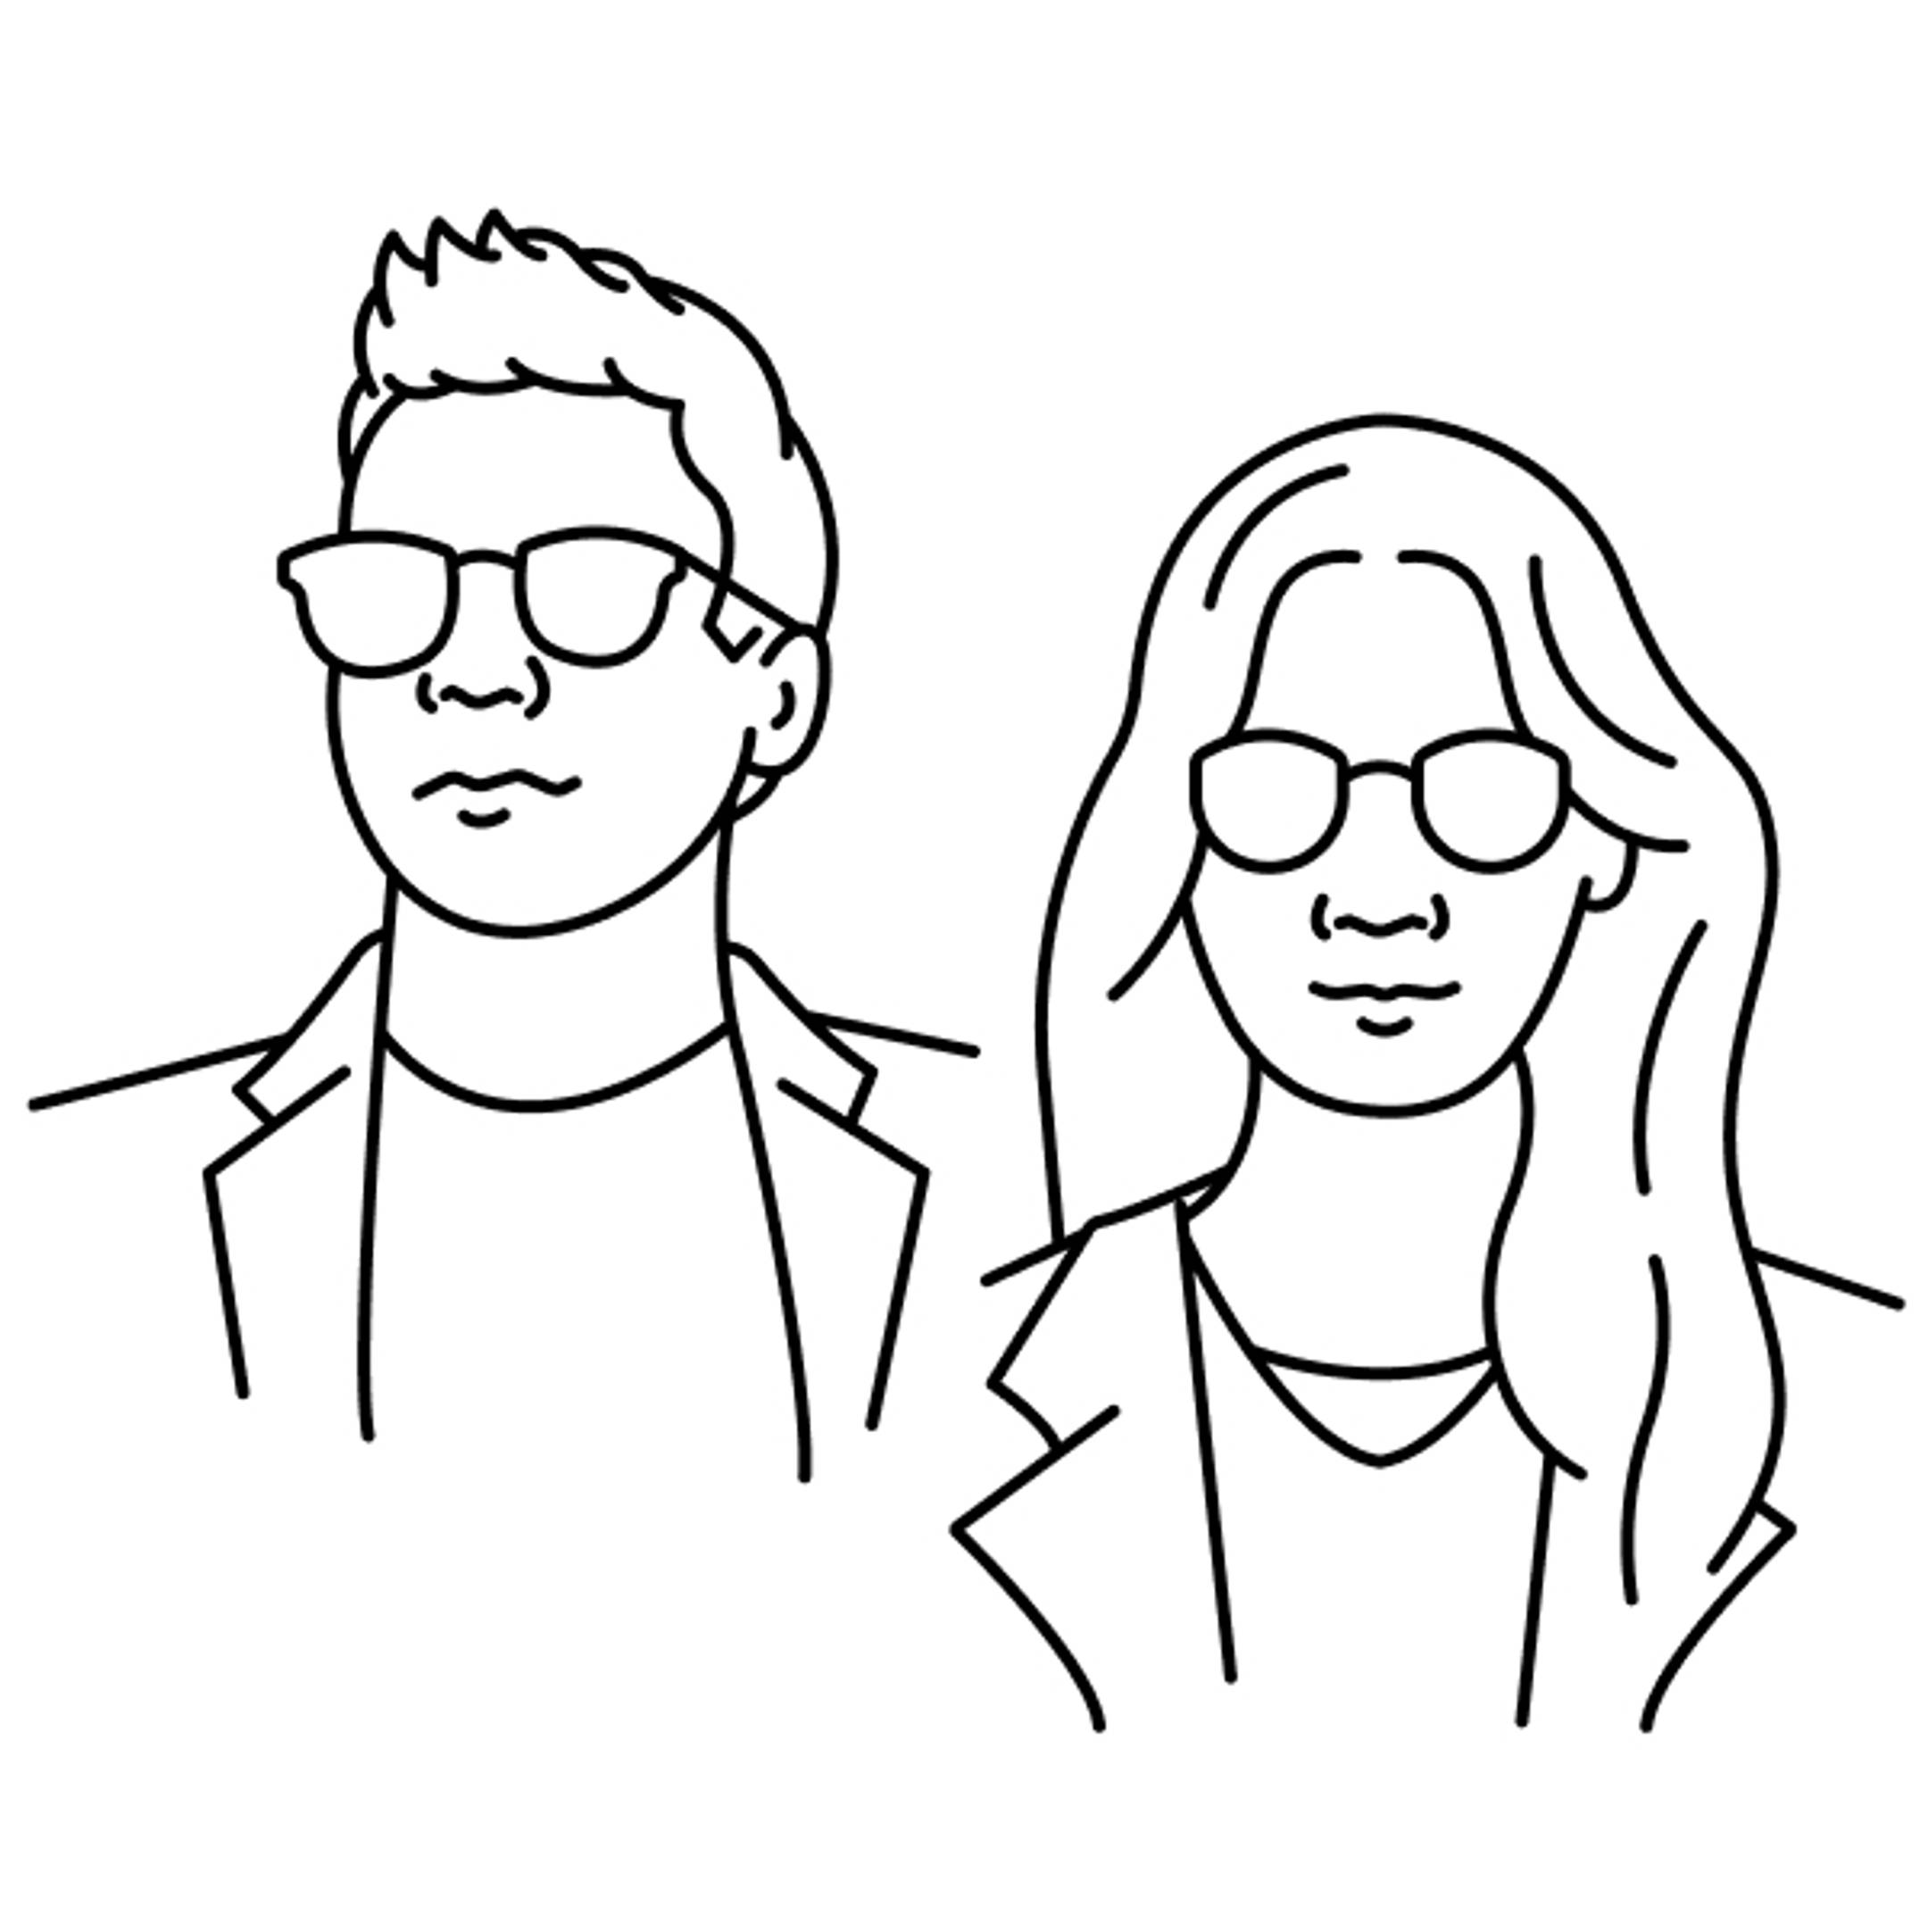 Animated drawing of opticians